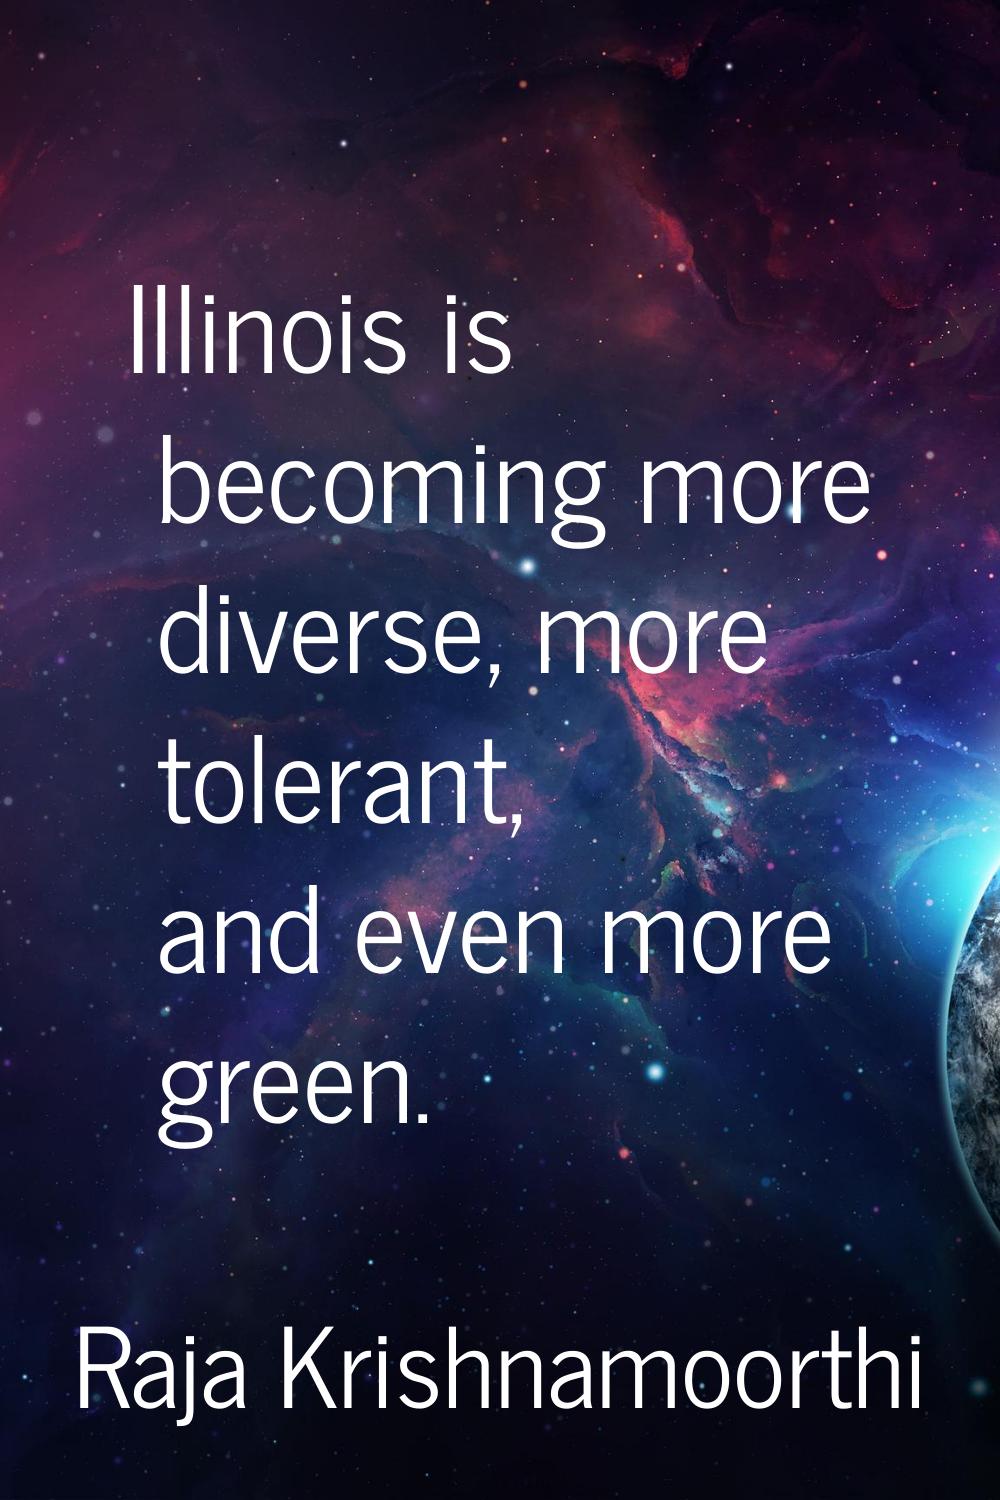 Illinois is becoming more diverse, more tolerant, and even more green.